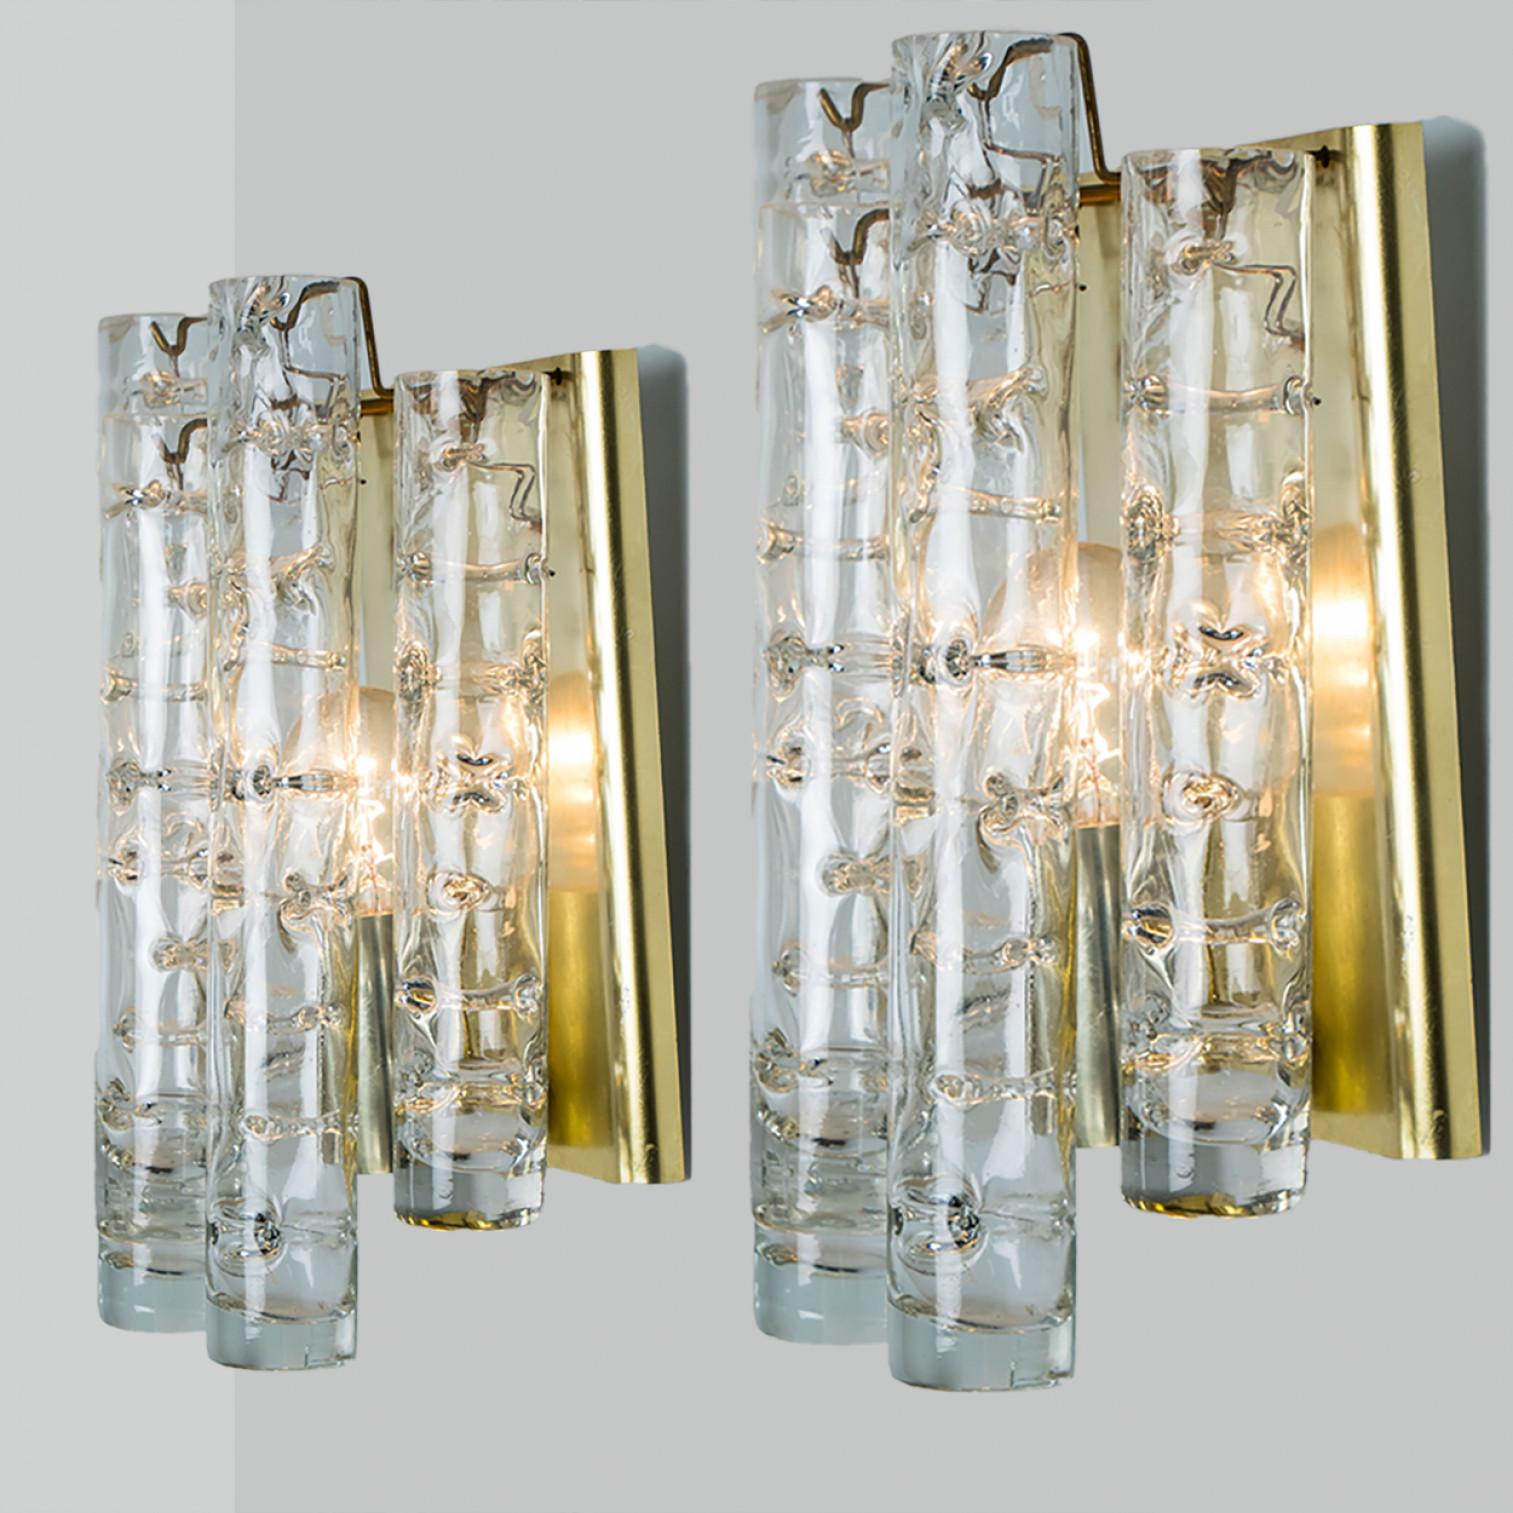 Pair of Structured Tubes Wall Lights by Doria Leuchten, 1960s For Sale 8